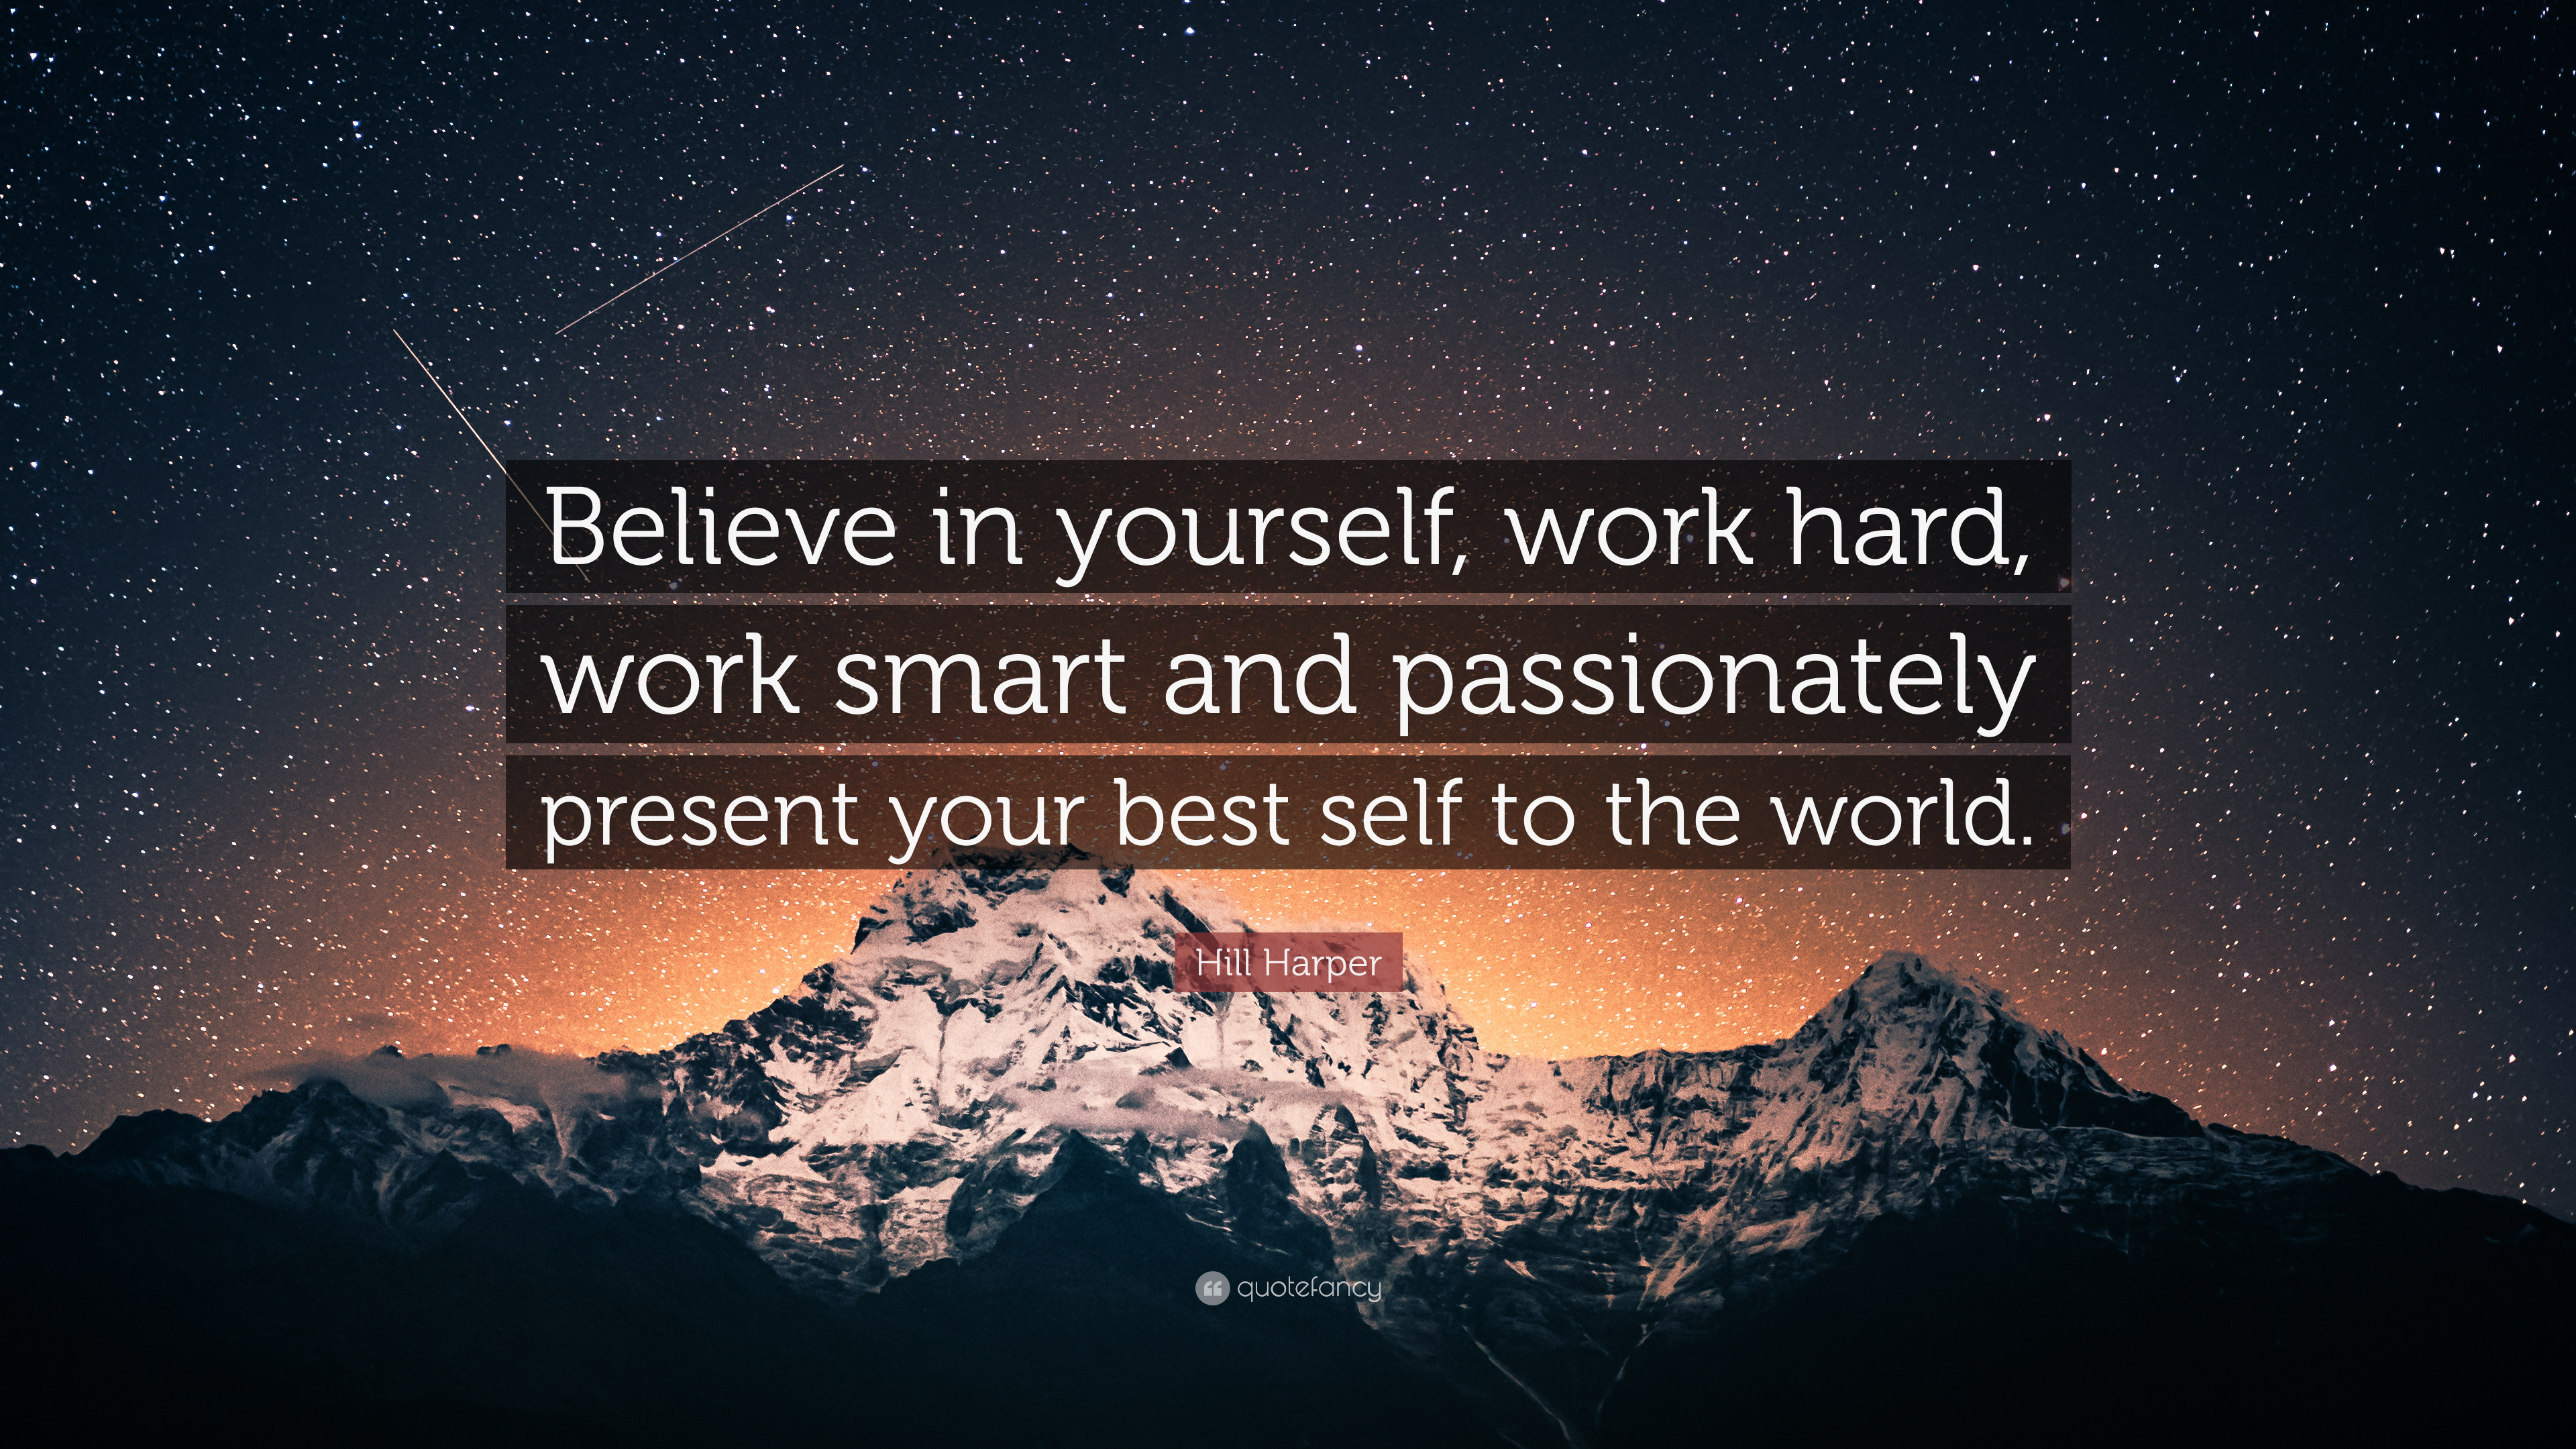 Hill Harper Quote: “Believe in yourself, work hard, work smart and passionately present your best self